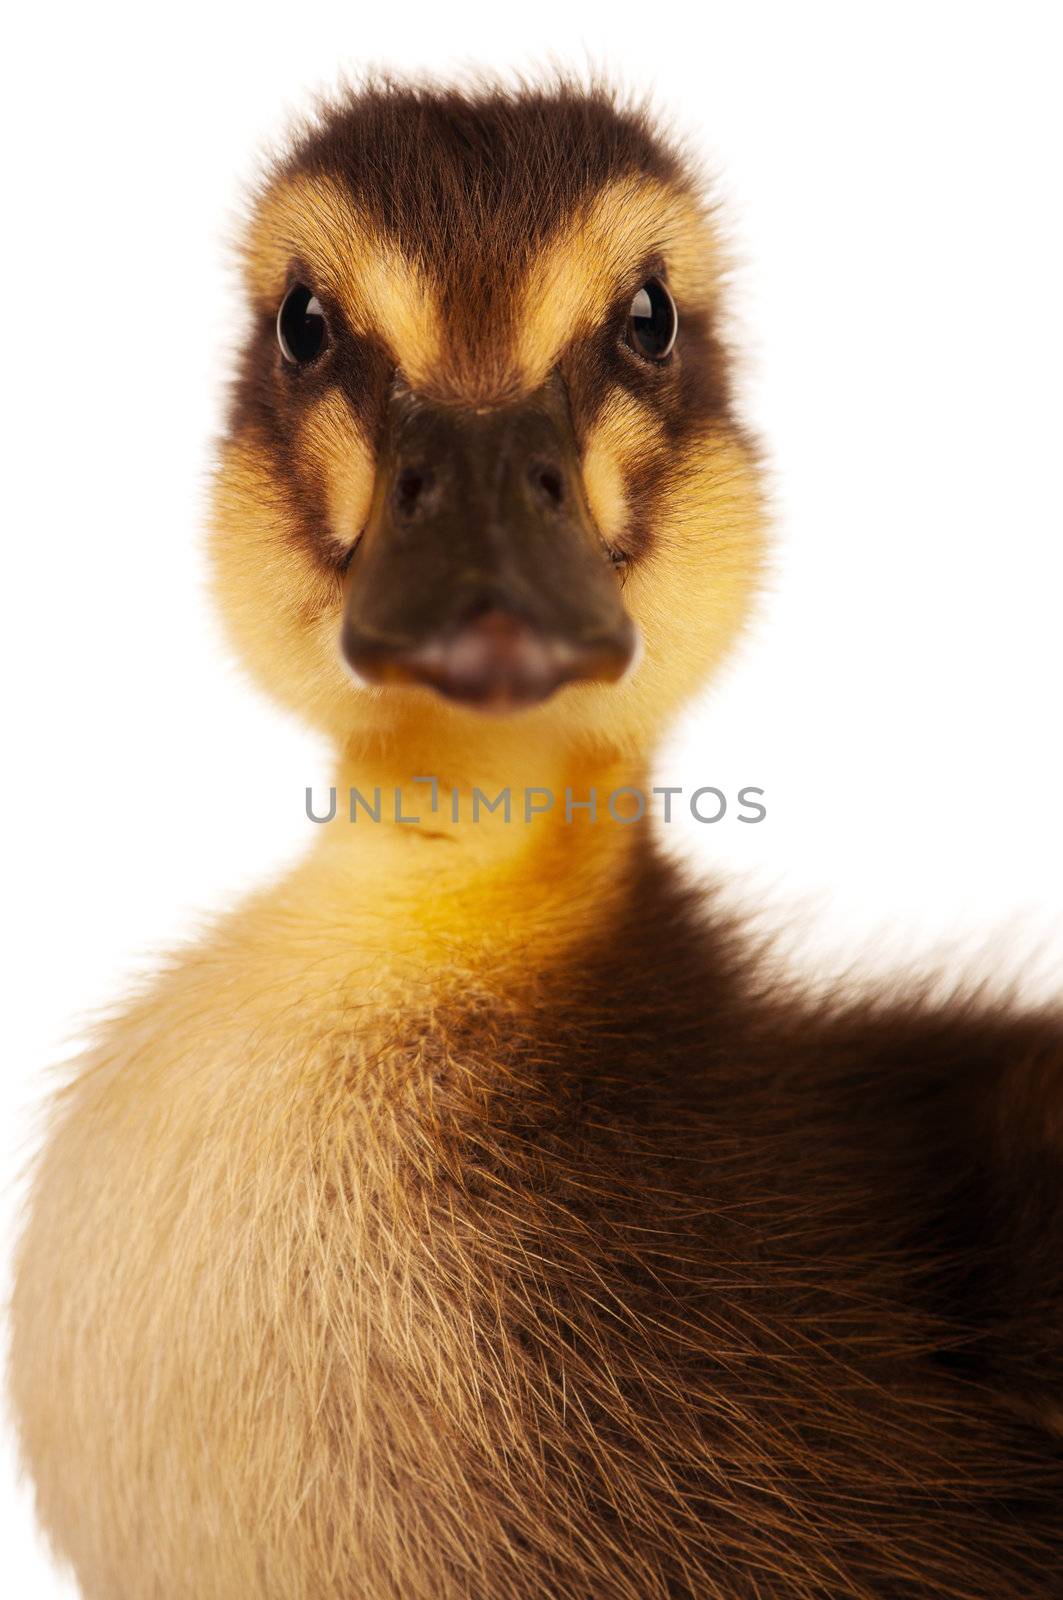 Cute domestic duckling isolated on white background